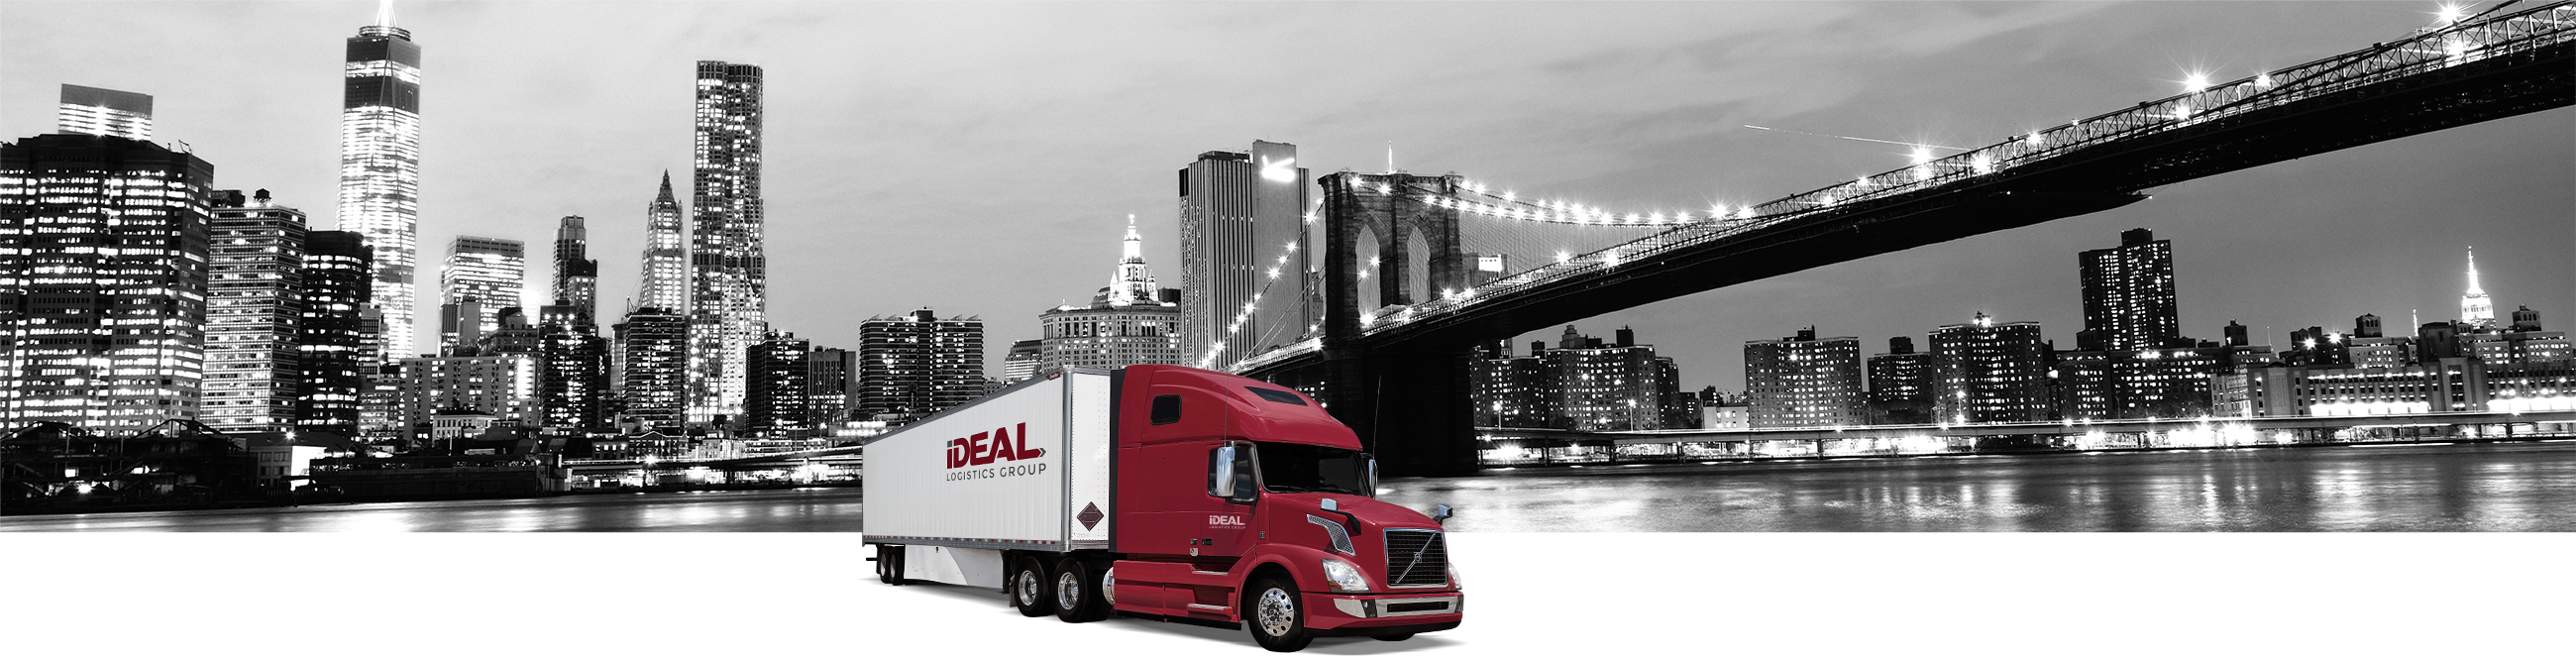 Ideal logistics truck in the USA